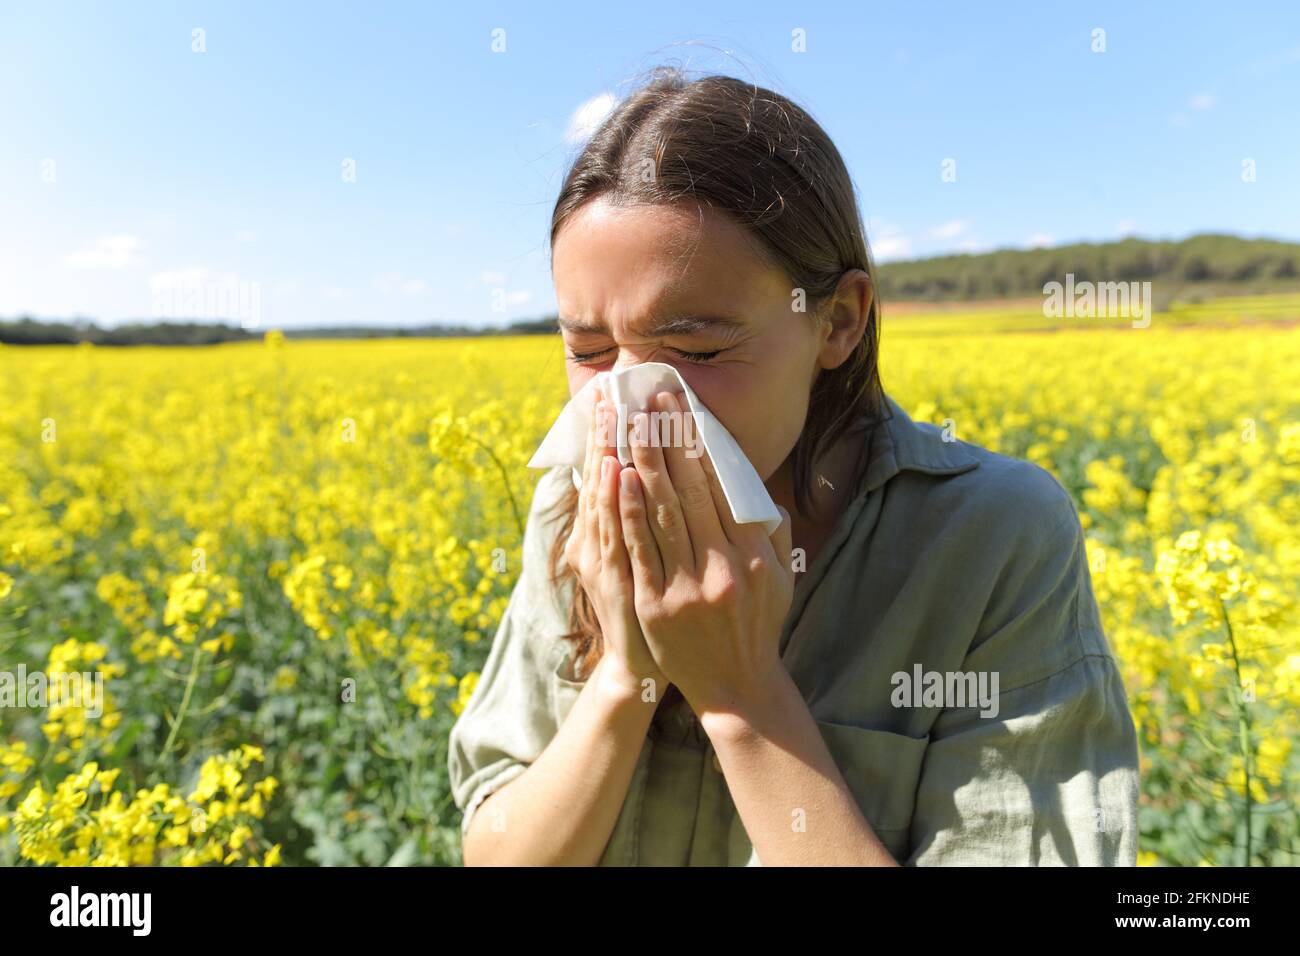 Woman suffering allergy coughing in a yellow flowered field in spring season Stock Photo